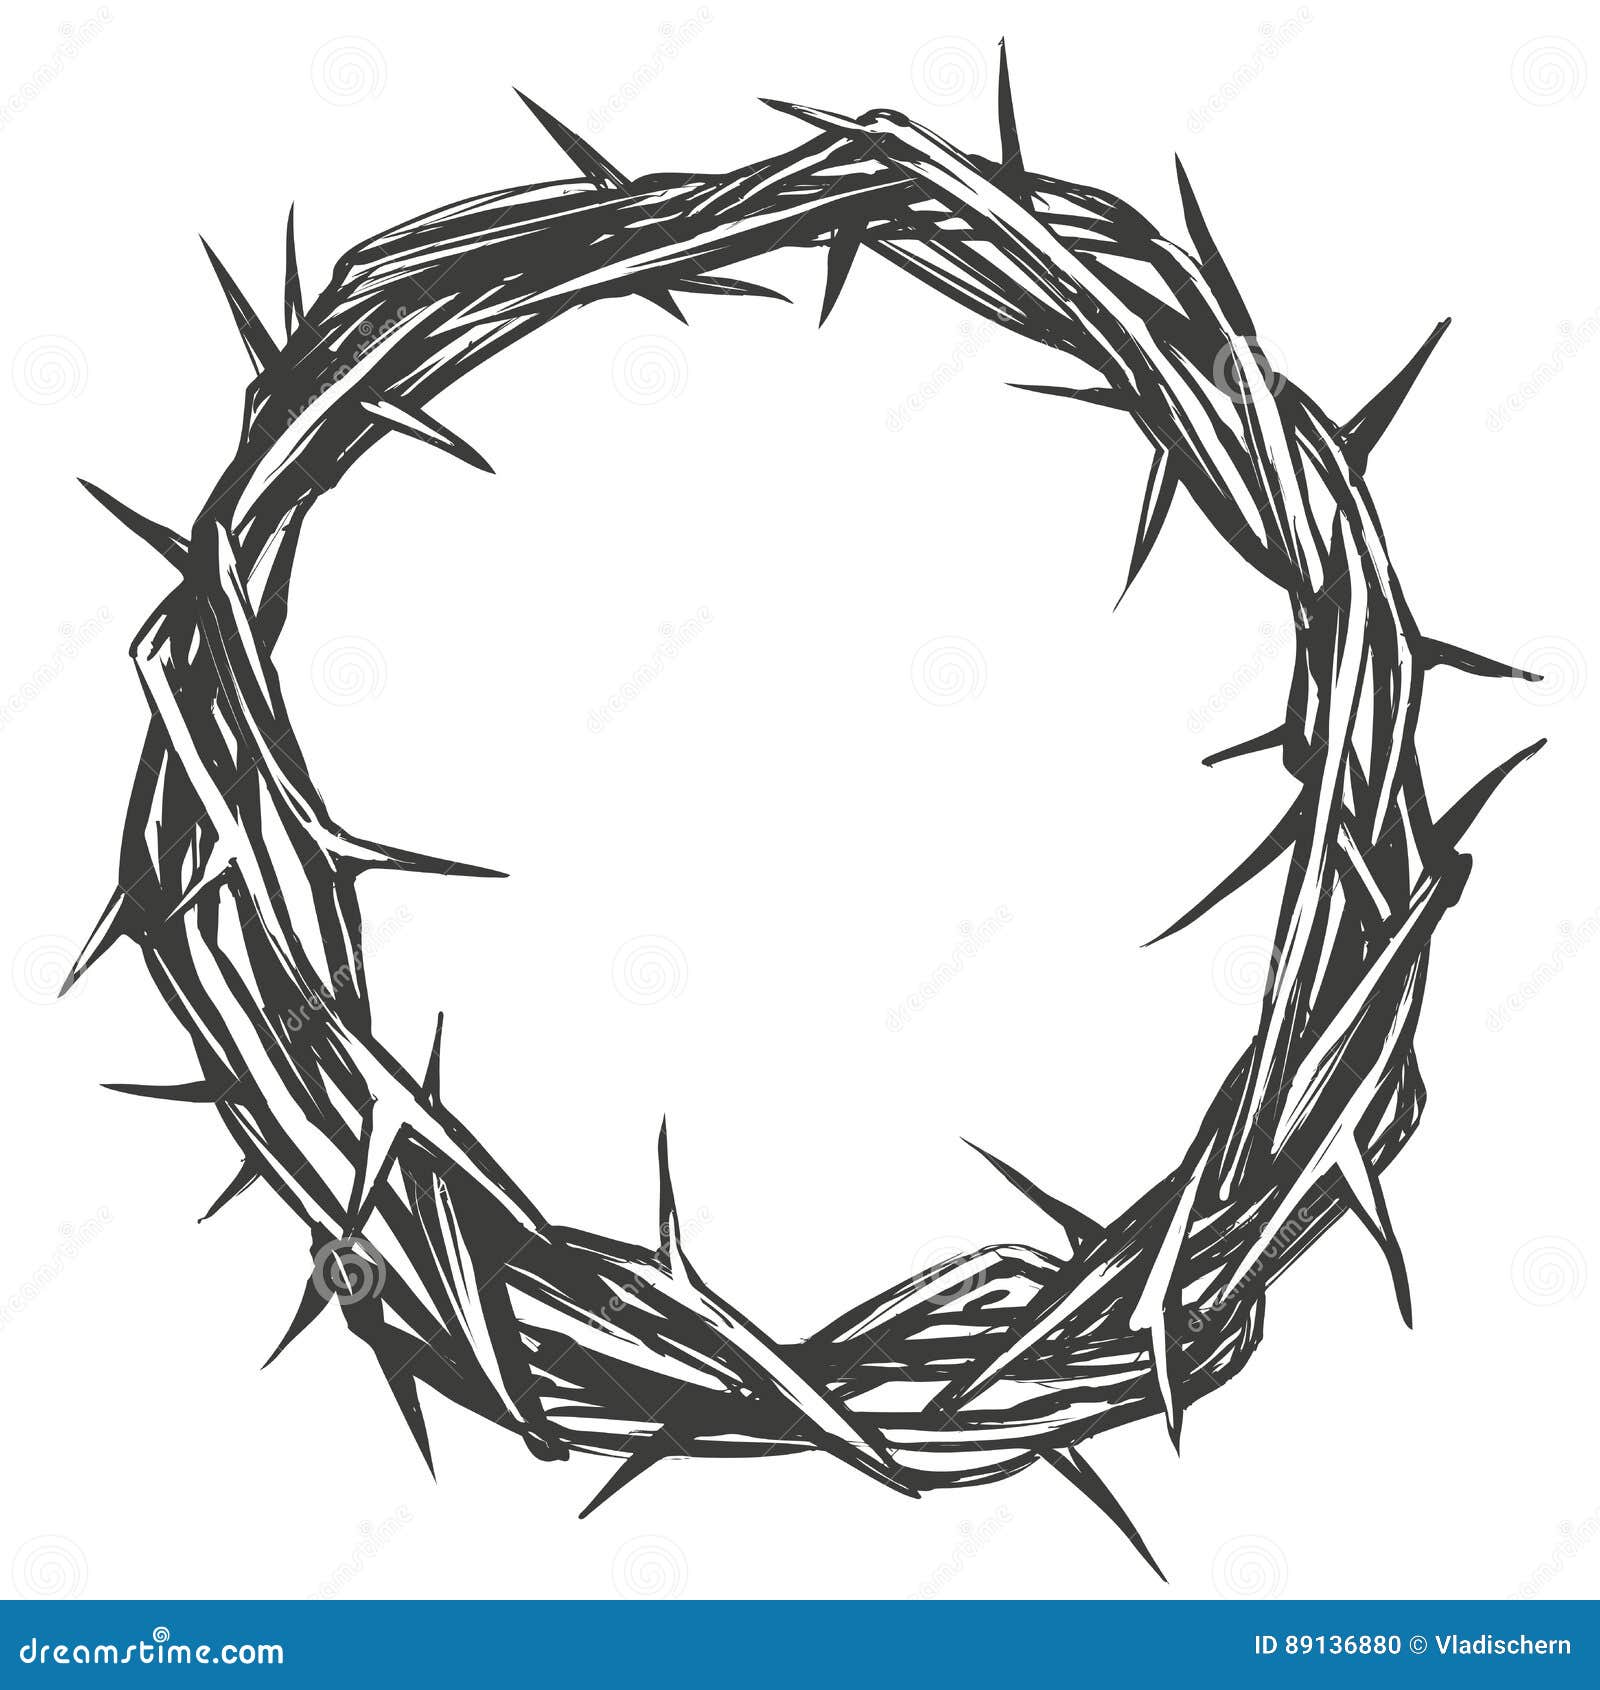 Download Crown Of Thorns, Easter Religious Symbol Of Christianity ...